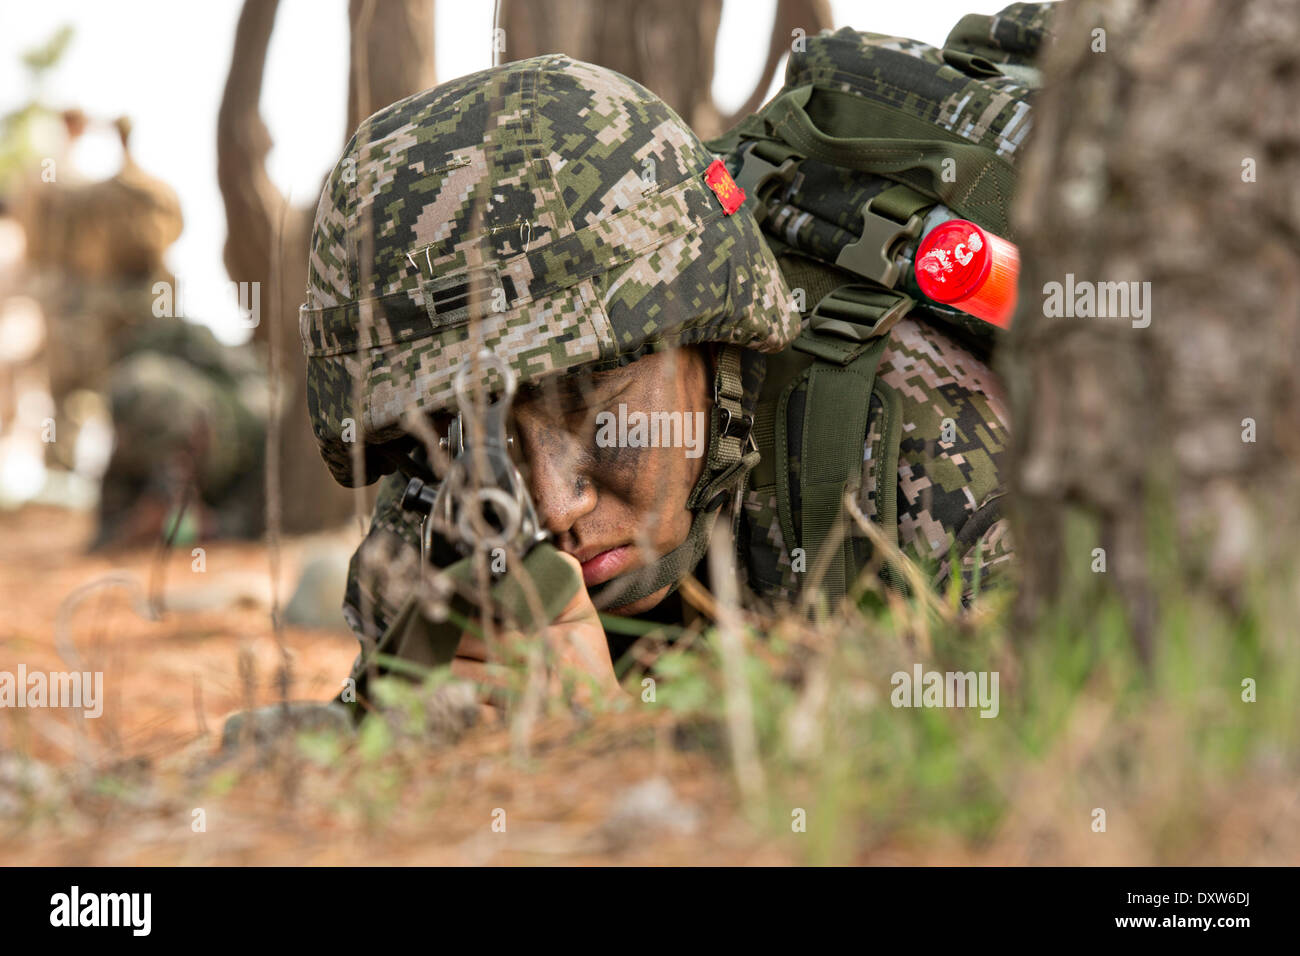 Republic of Korea Marines take cover during a simulated amphibious assault part of joint training exercise Ssang Yong March 31, 2014 in Doksu-Ri, Pohang, South Korea. Stock Photo